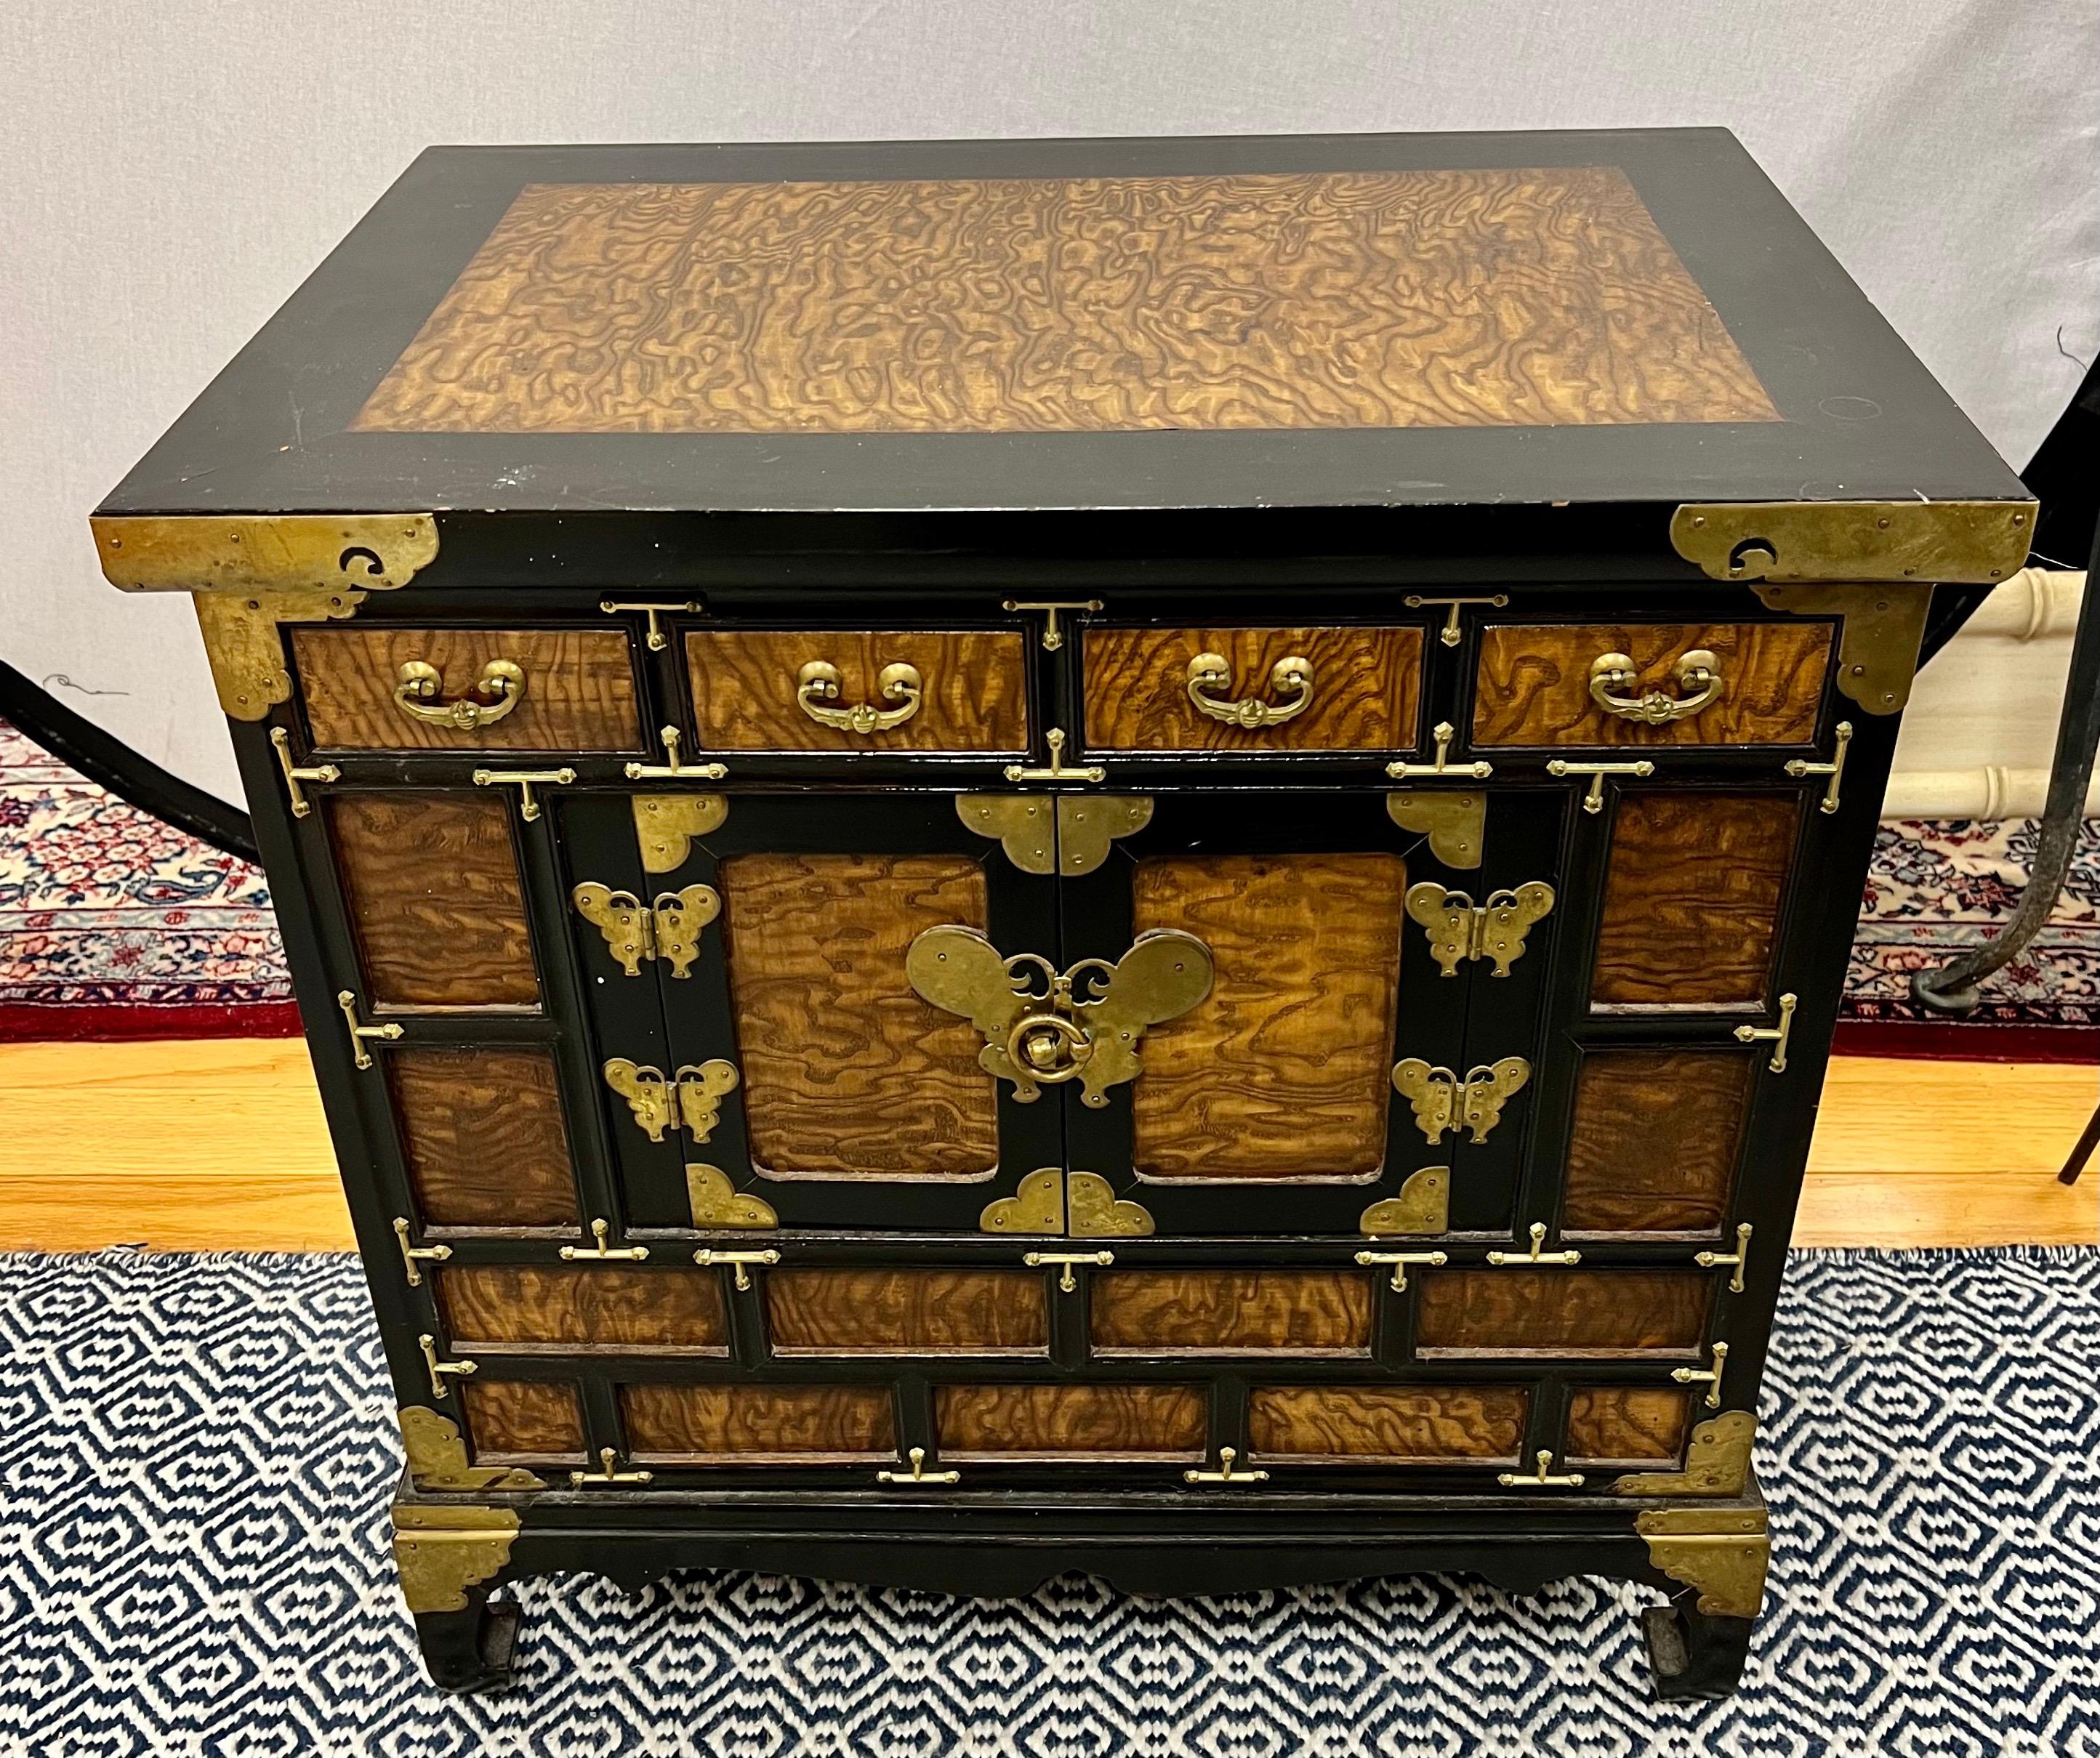 Asian scholar's chest configured with four upper drawers over lower cabinet. Beautifully appointed with striking brass butterfly hardware and hinges. Richly grained two-tone finish. Own the best.